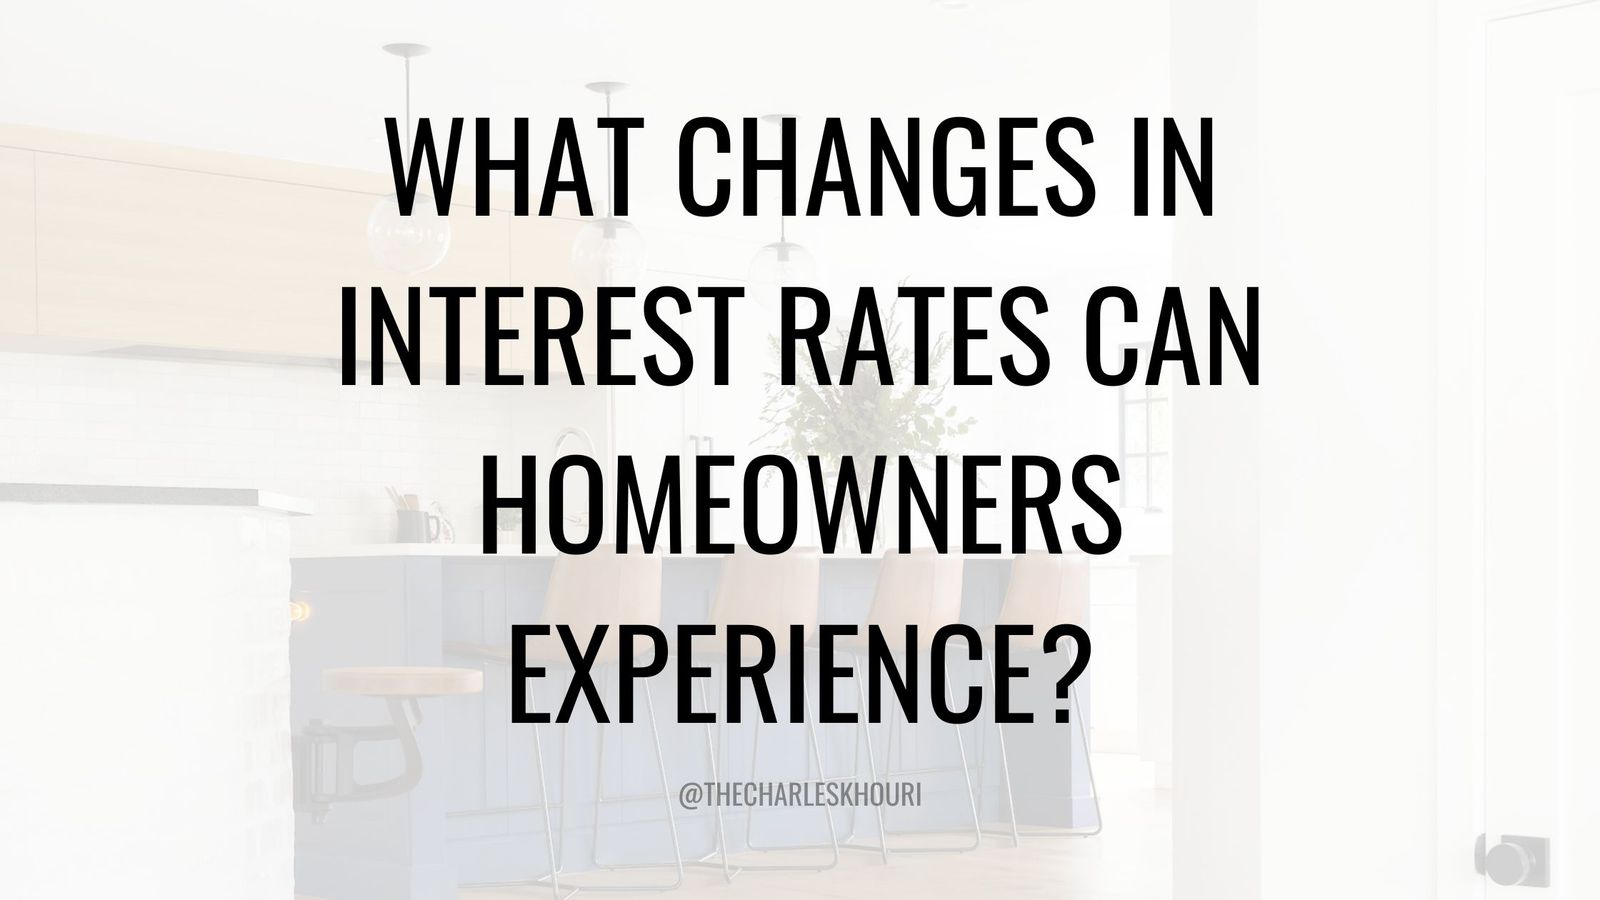 What changes in interest rates can homeowners experience?